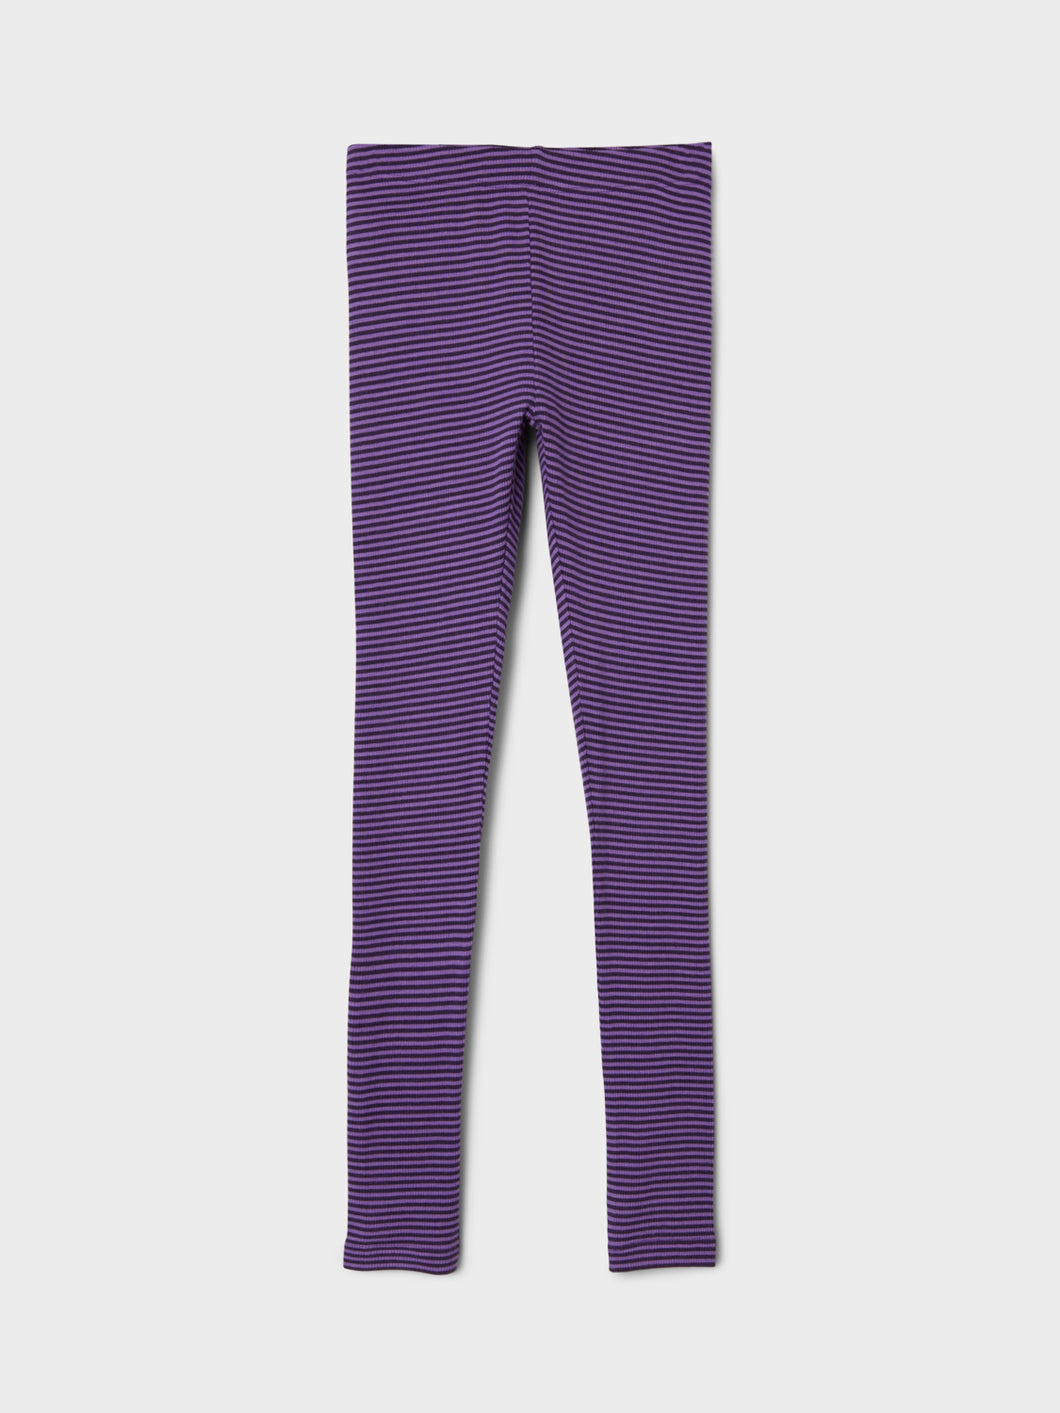 NKFOLANA Trousers - Amethyst Orchid